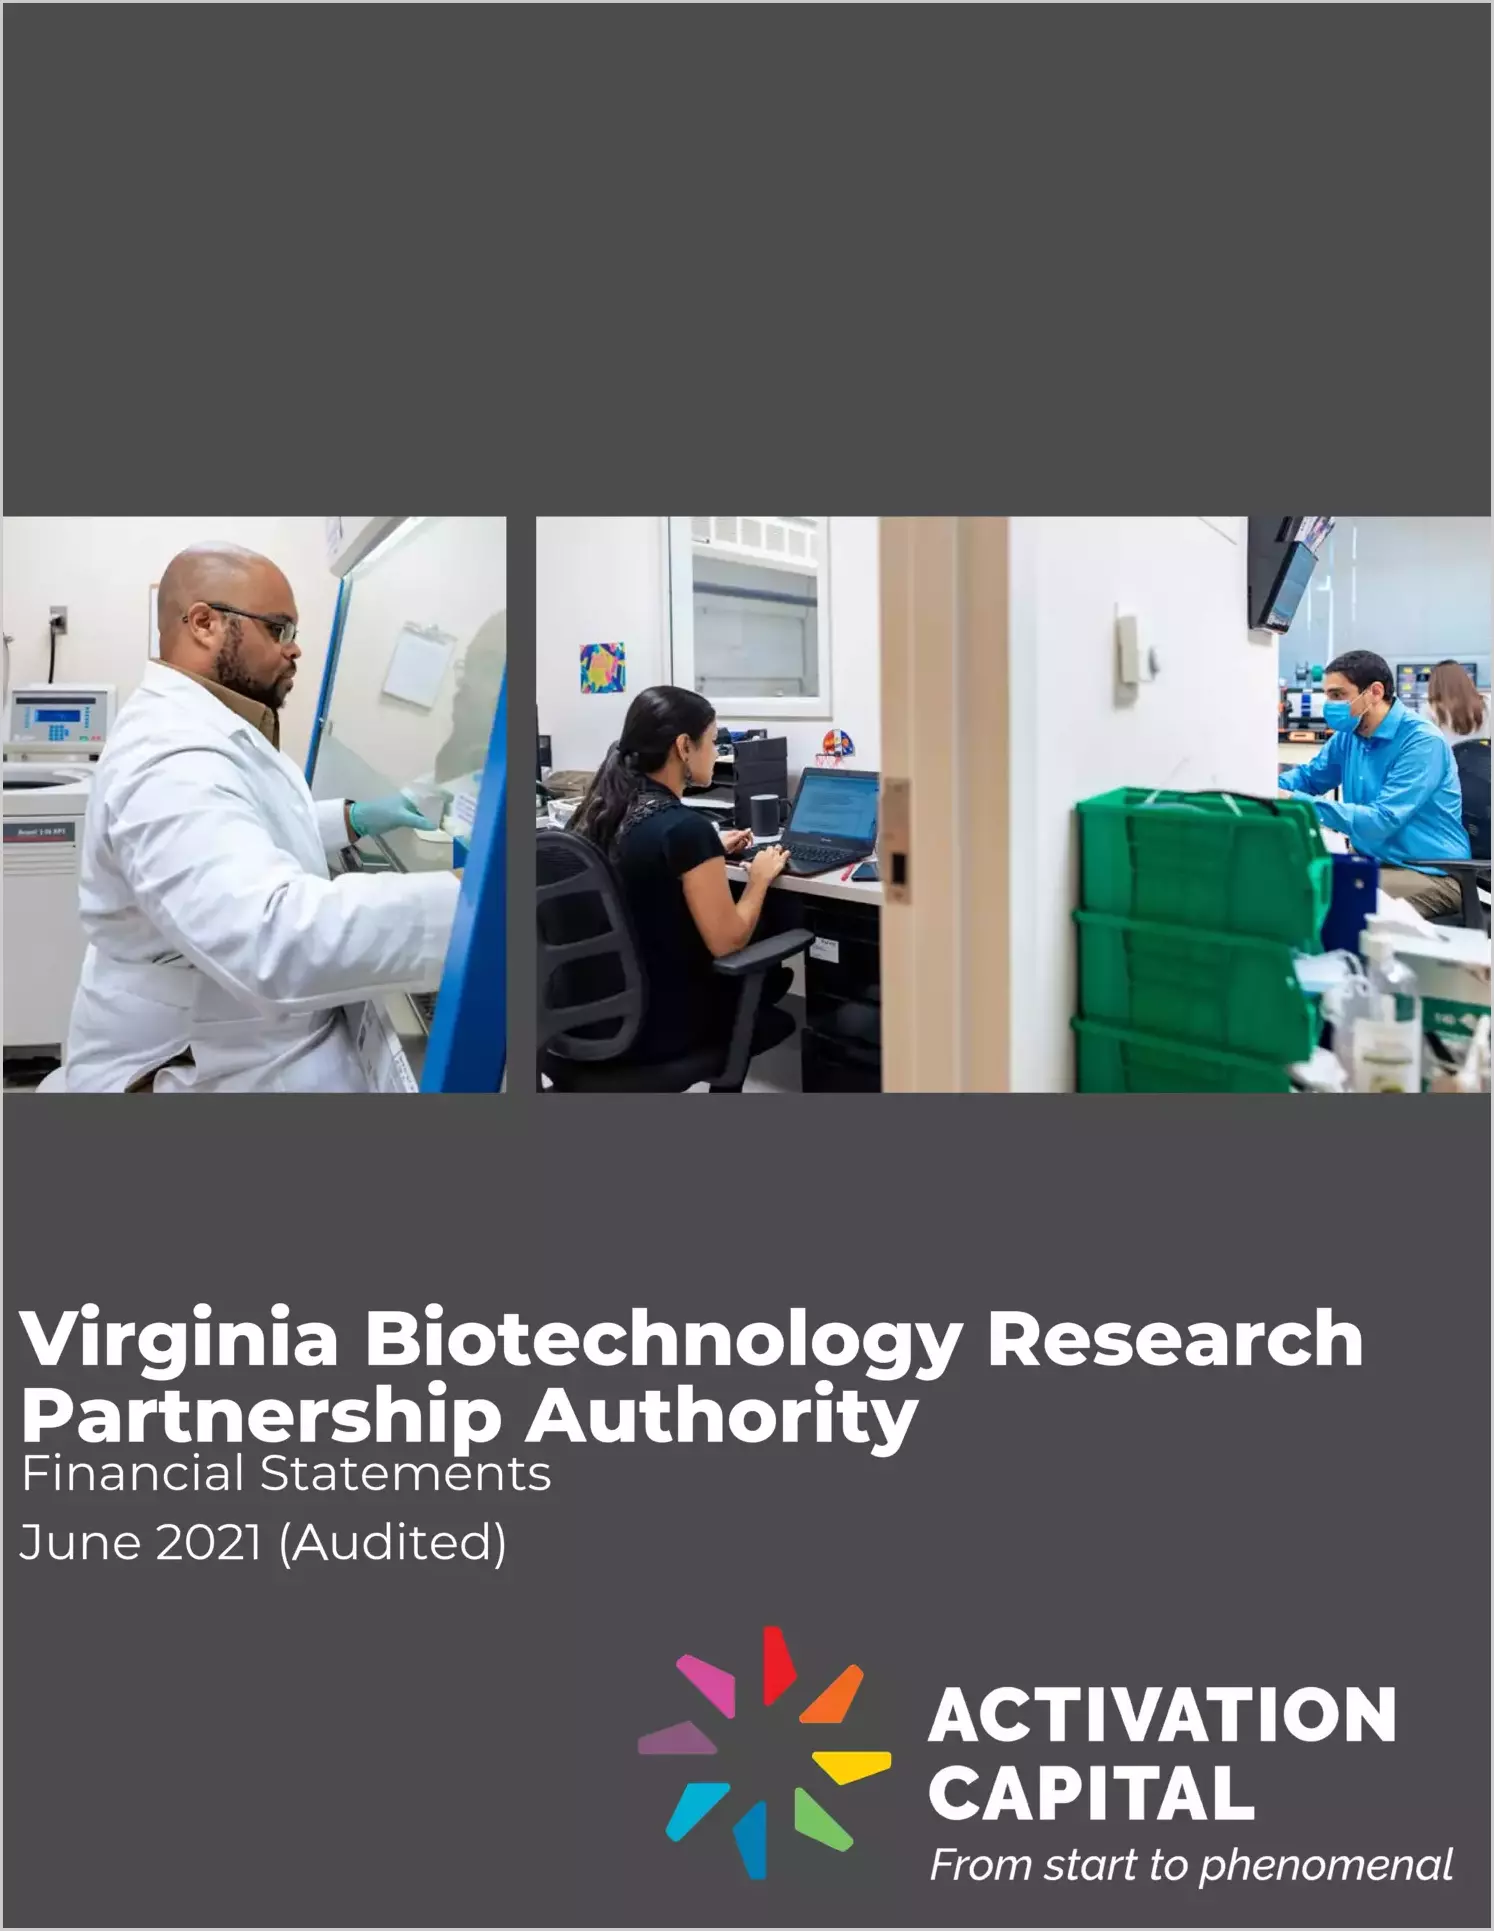 Virginia Biotechnology Research Partnership Authority Financial Statements for the year ended June 30, 2021